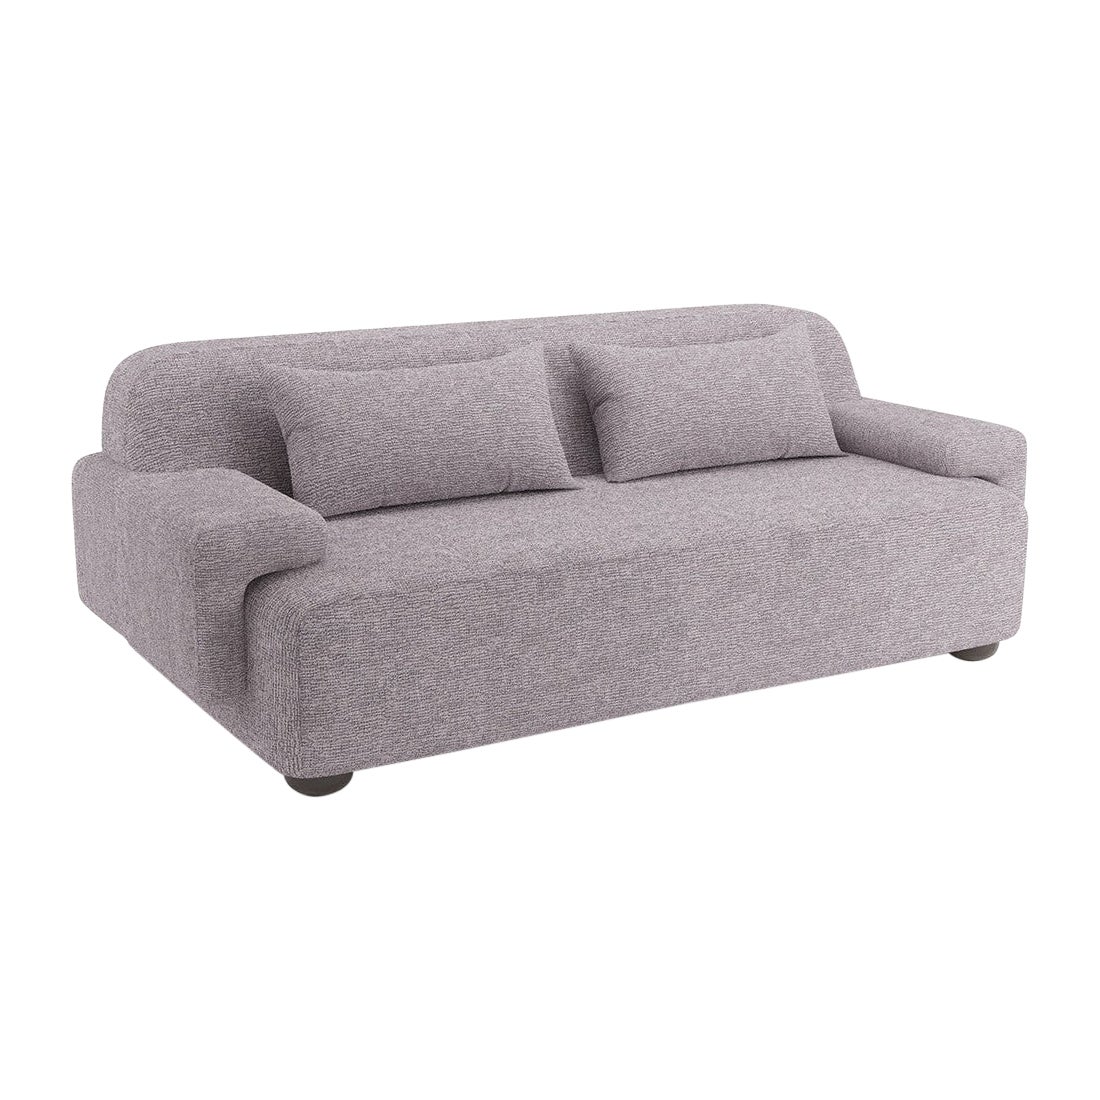 Popus Editions Lena 2.5 Seater Sofa in Mouse Megeve Fabric with Knit Effect For Sale